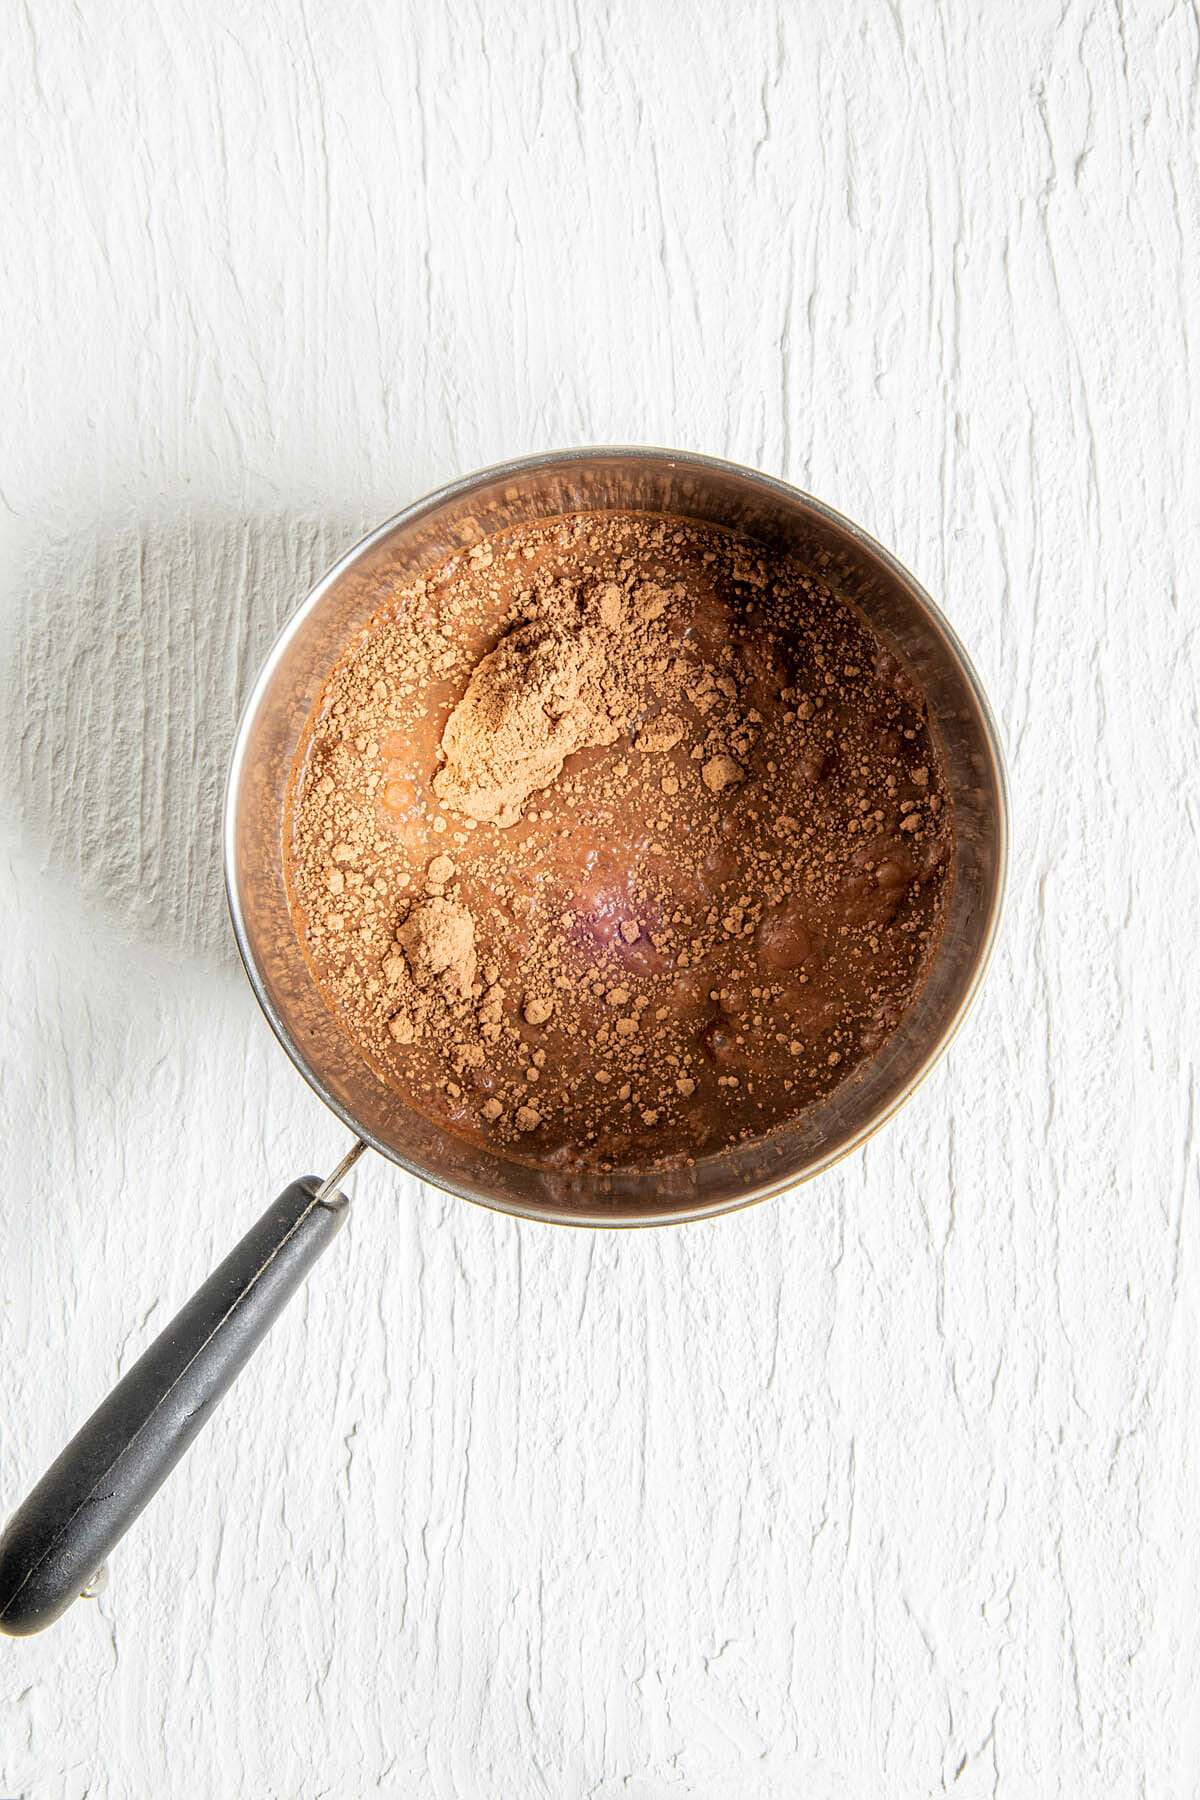 Cacao powder, brown sugar, and water in a saucepan.